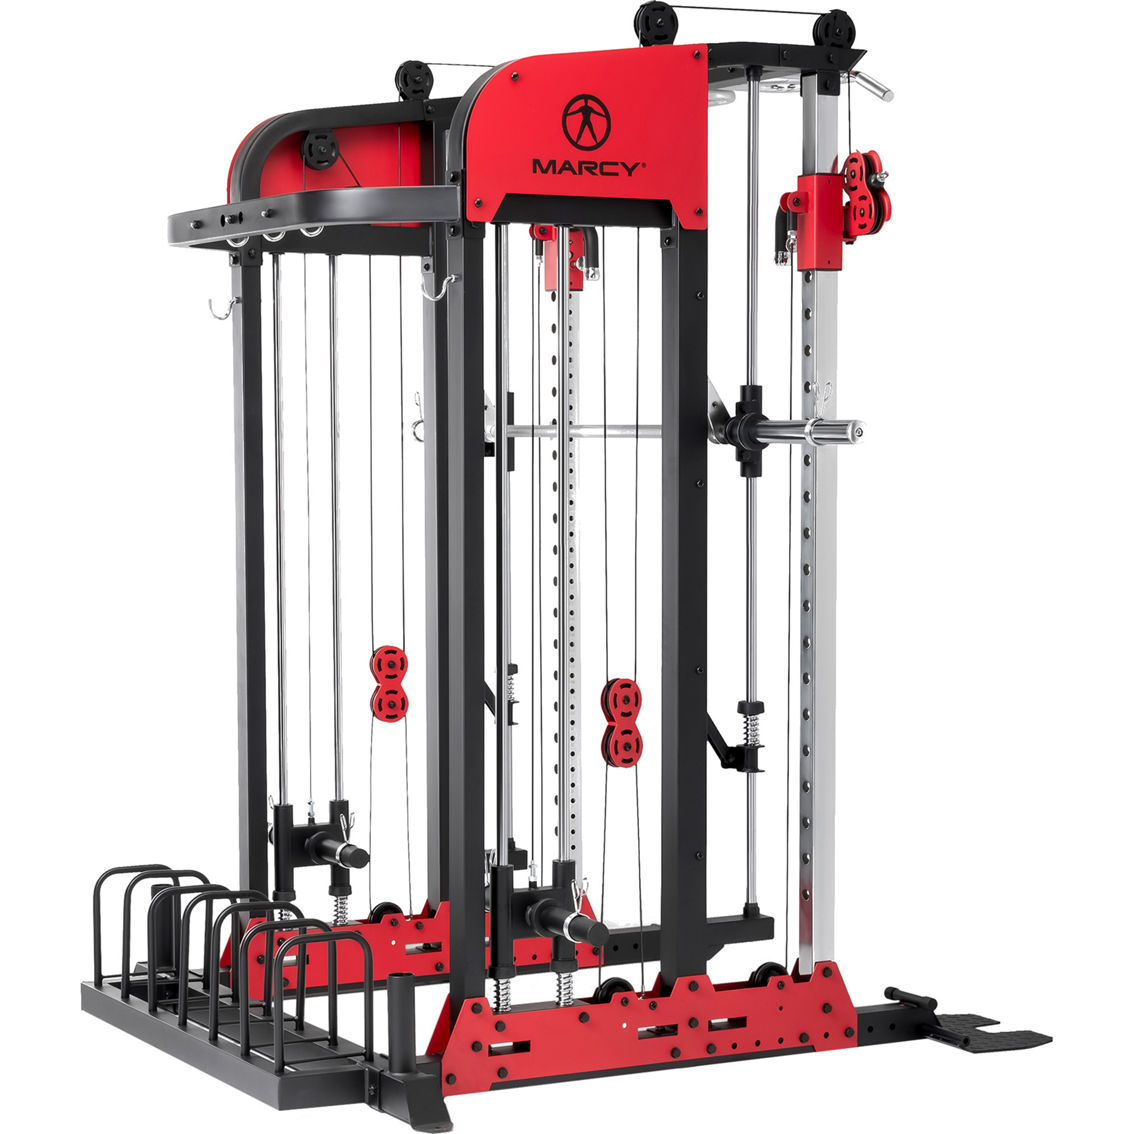 Marcy Pro Deluxe Smith Cage Home Gym System - Image 2 of 5